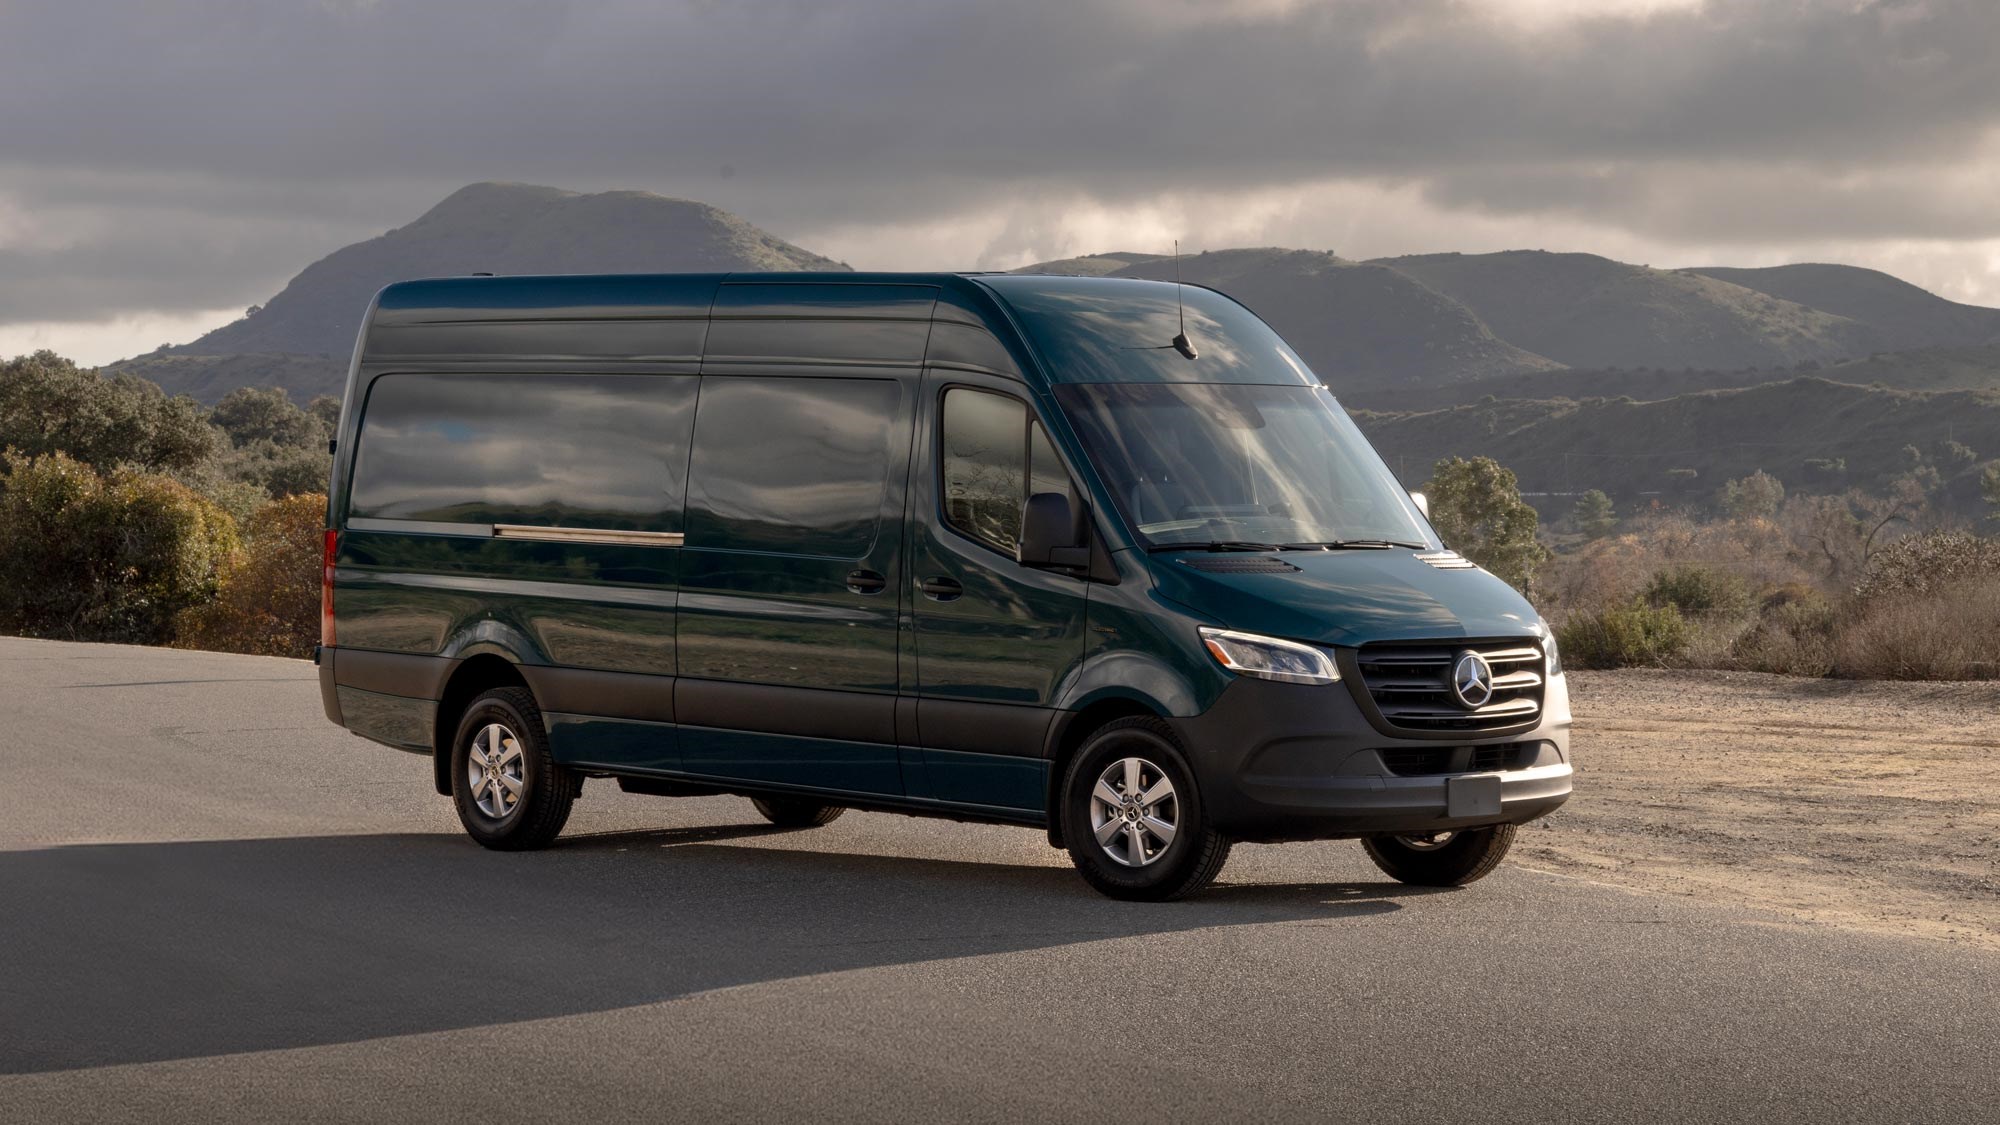 Mercedes Marco Polo updated, as V-Class promises S-Class lux in a van